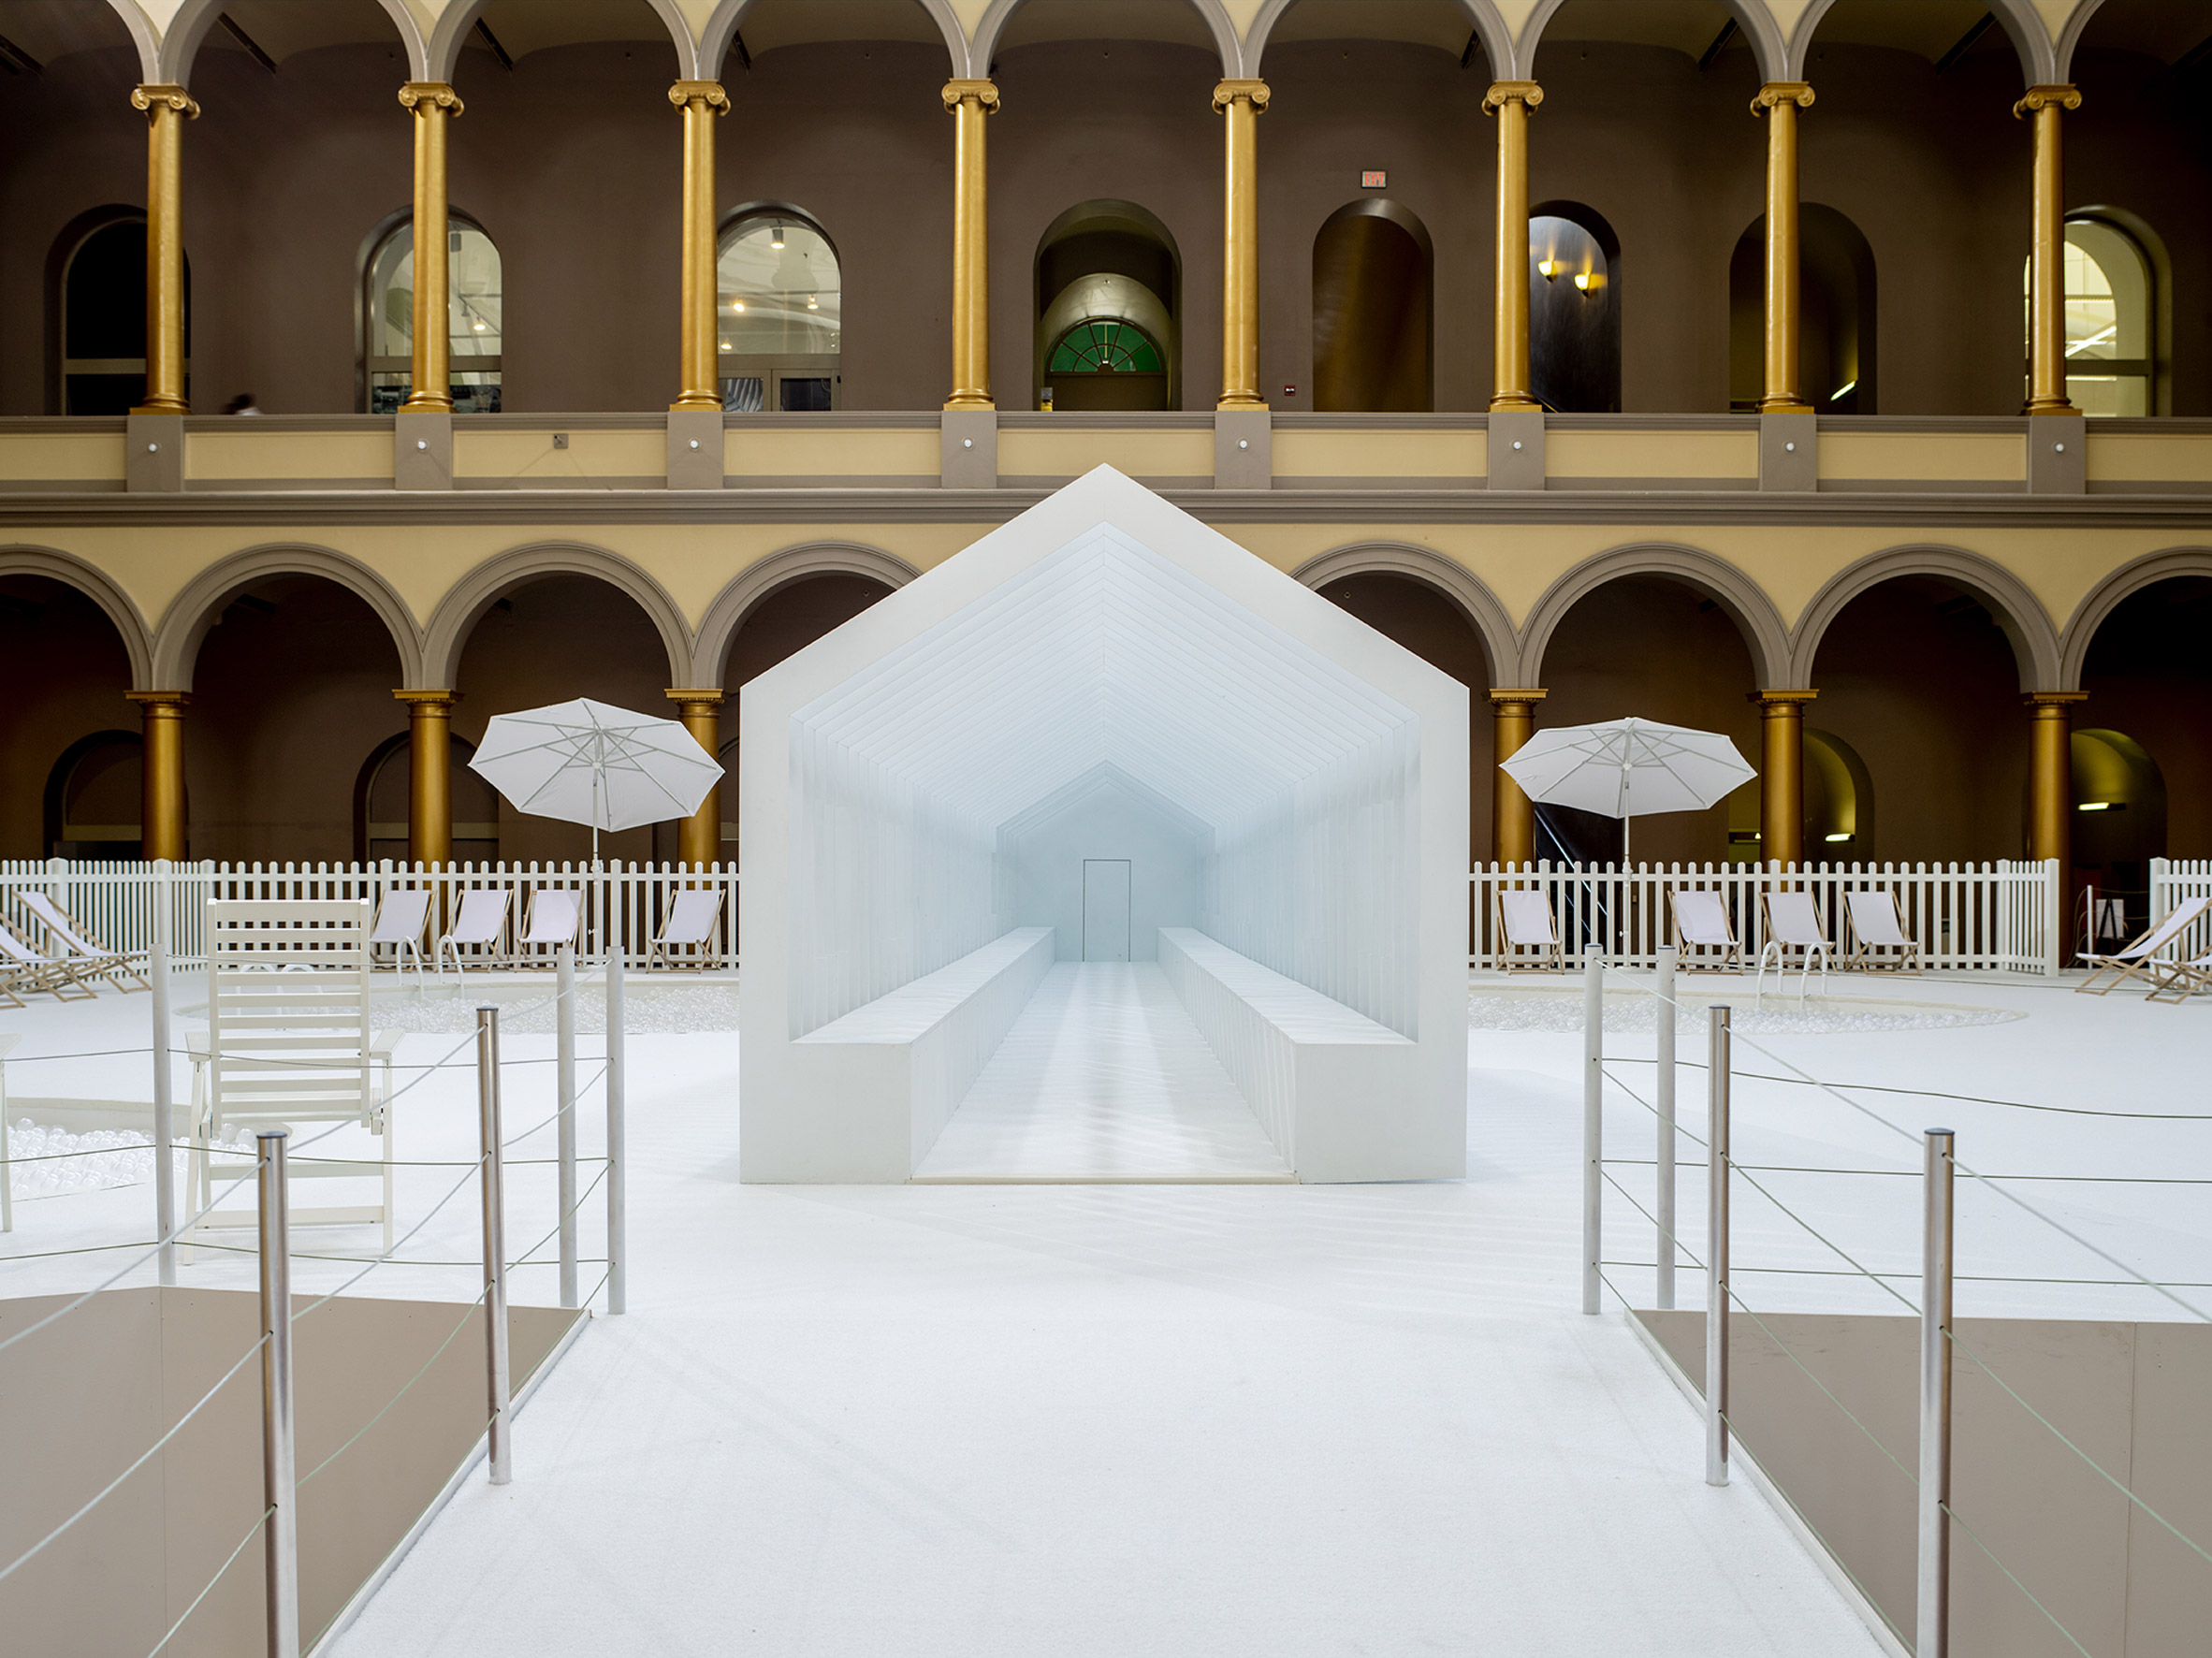 Fun House by Snarkitecture